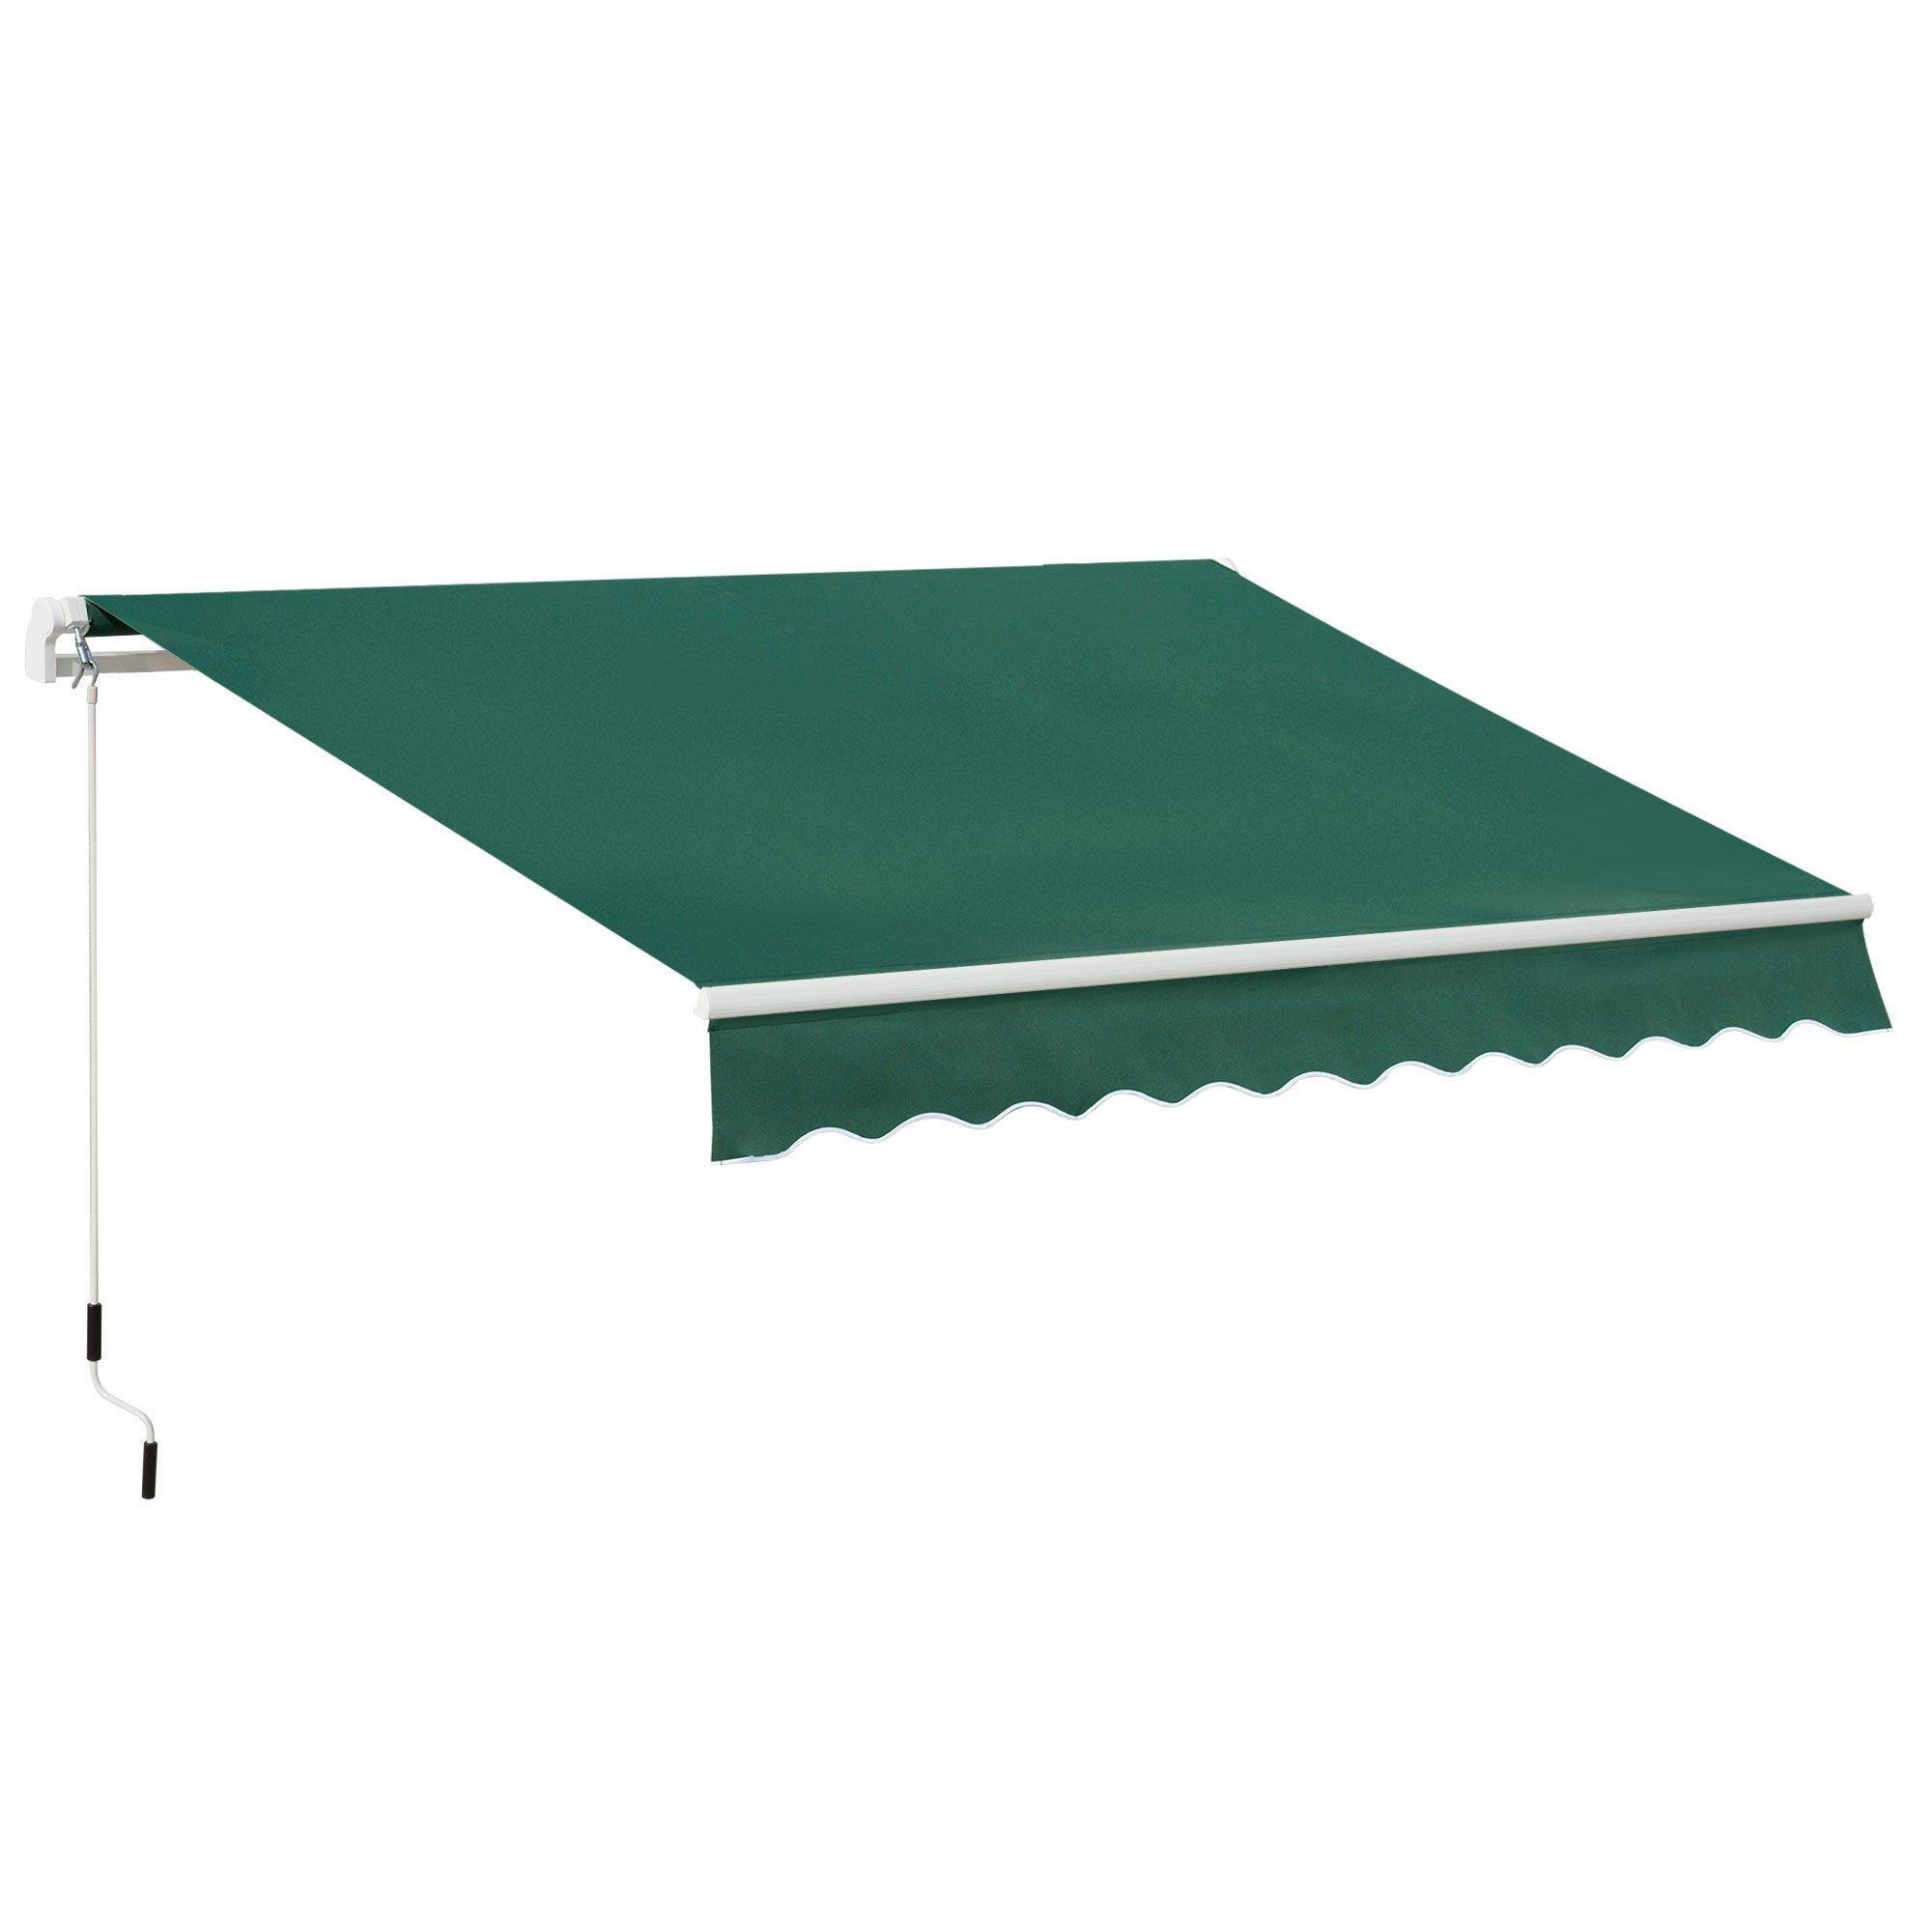 Manual Retractable Awning Garden Shelter Canopy 3 x 2m - image 1